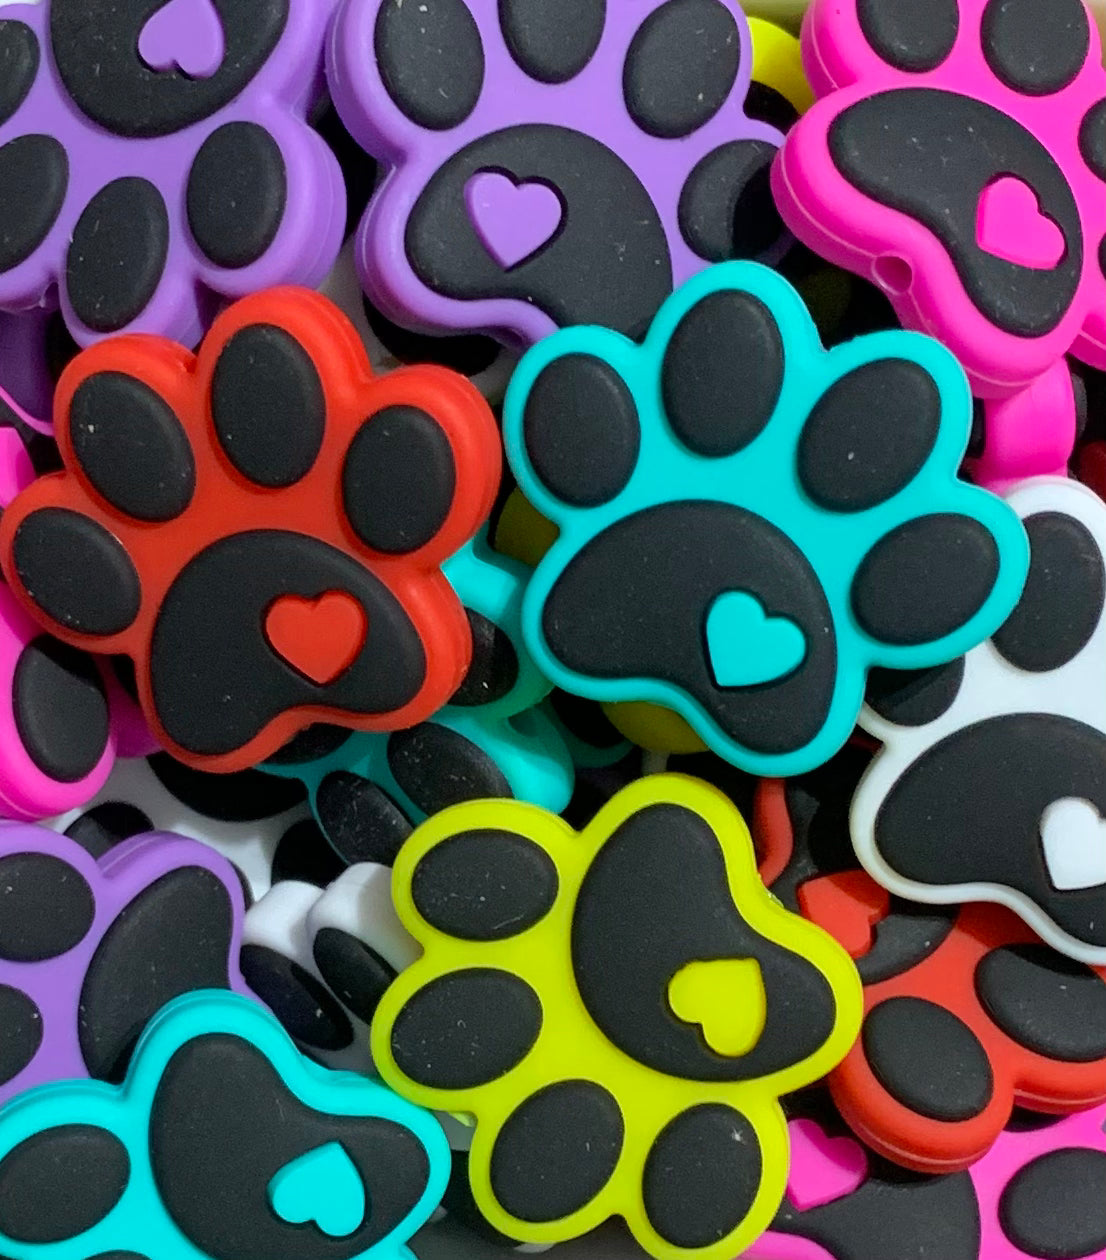 Silicone Focal Beads, 5Pcs Silicone Beads for Pens, Animal Dog Paw Silicone  Focal Character Spacer Beads for Pens DIY Jewelry Keychain Bracelet Making